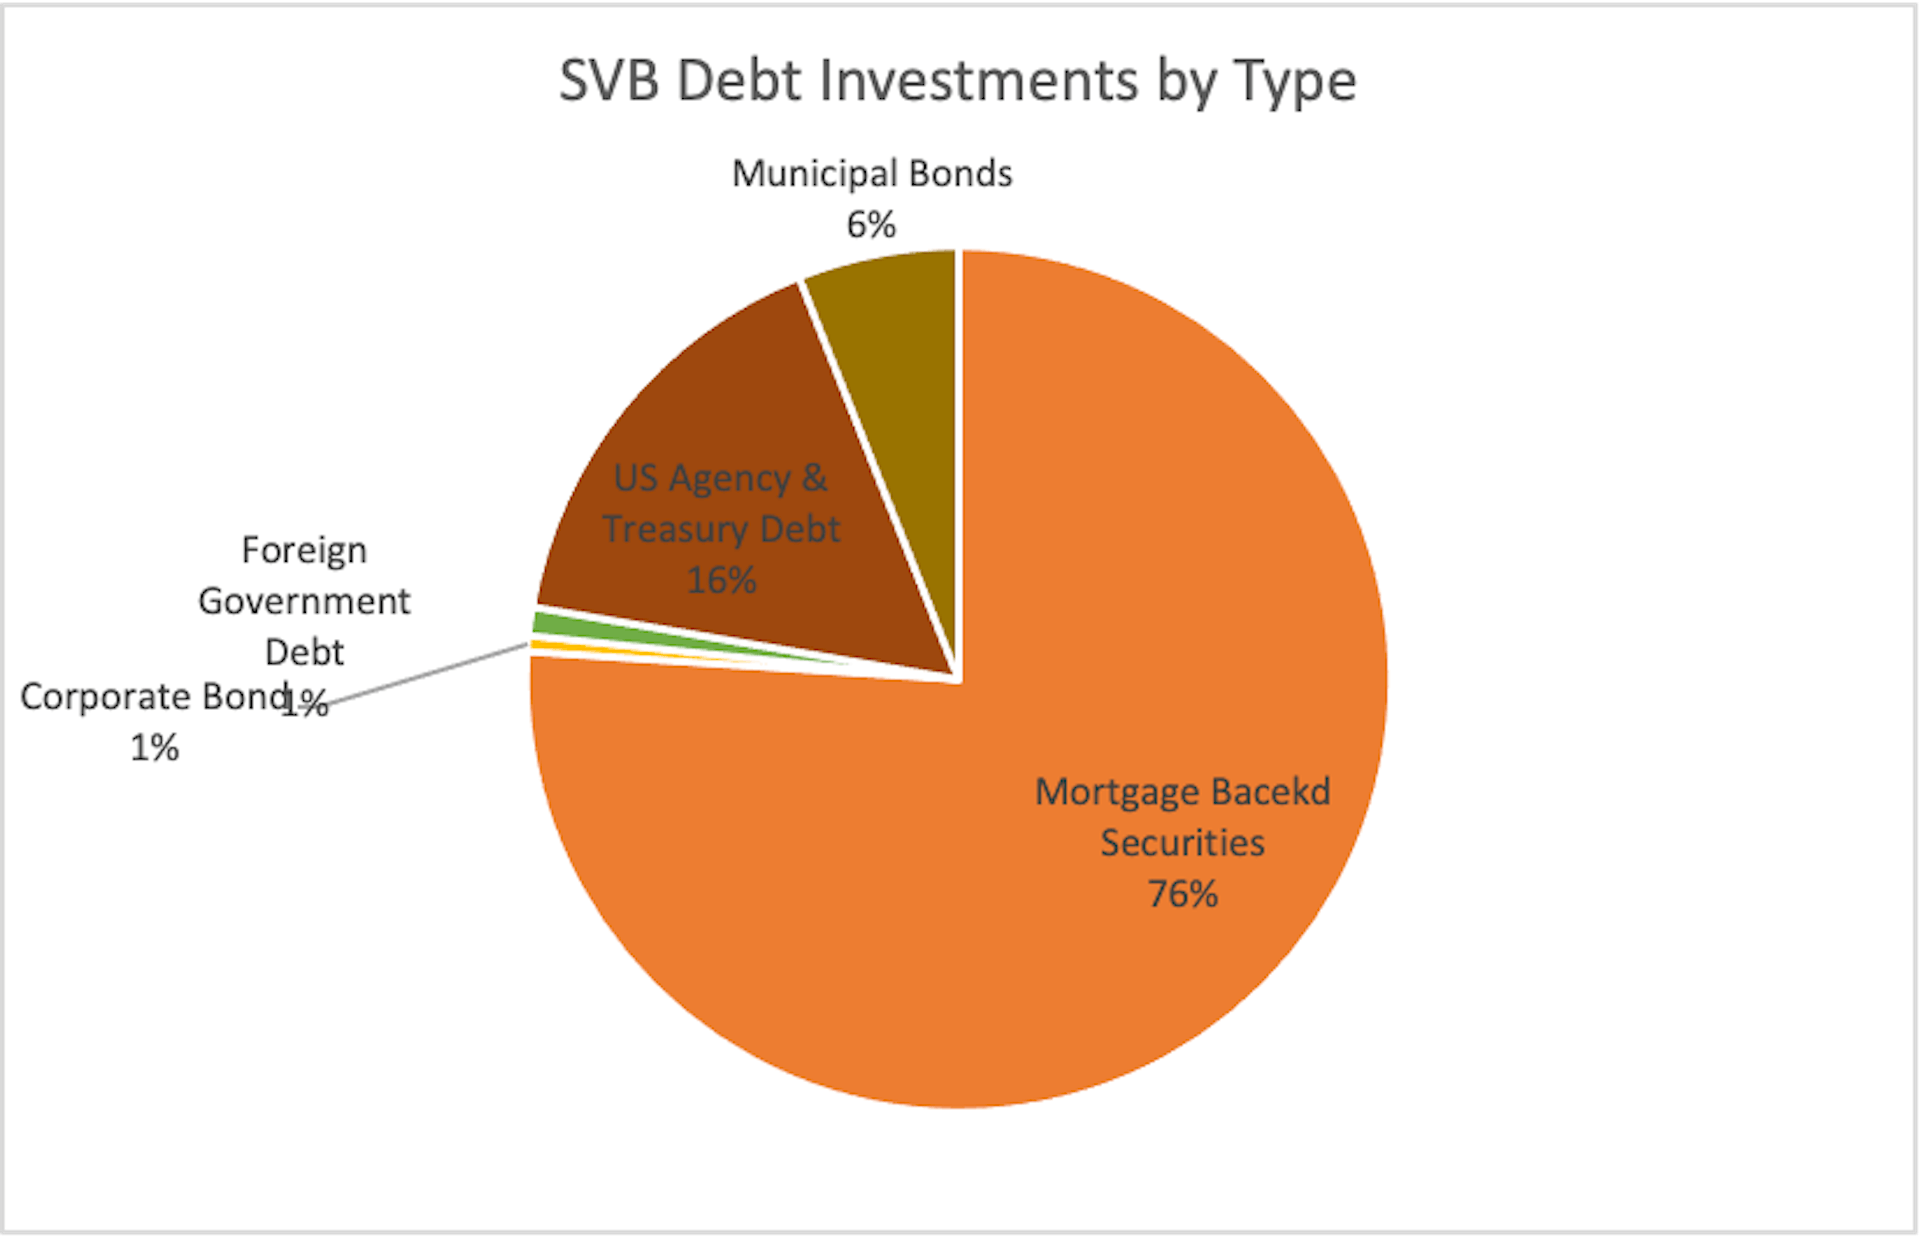 Silicon Valley Bank (SVB) debt by type